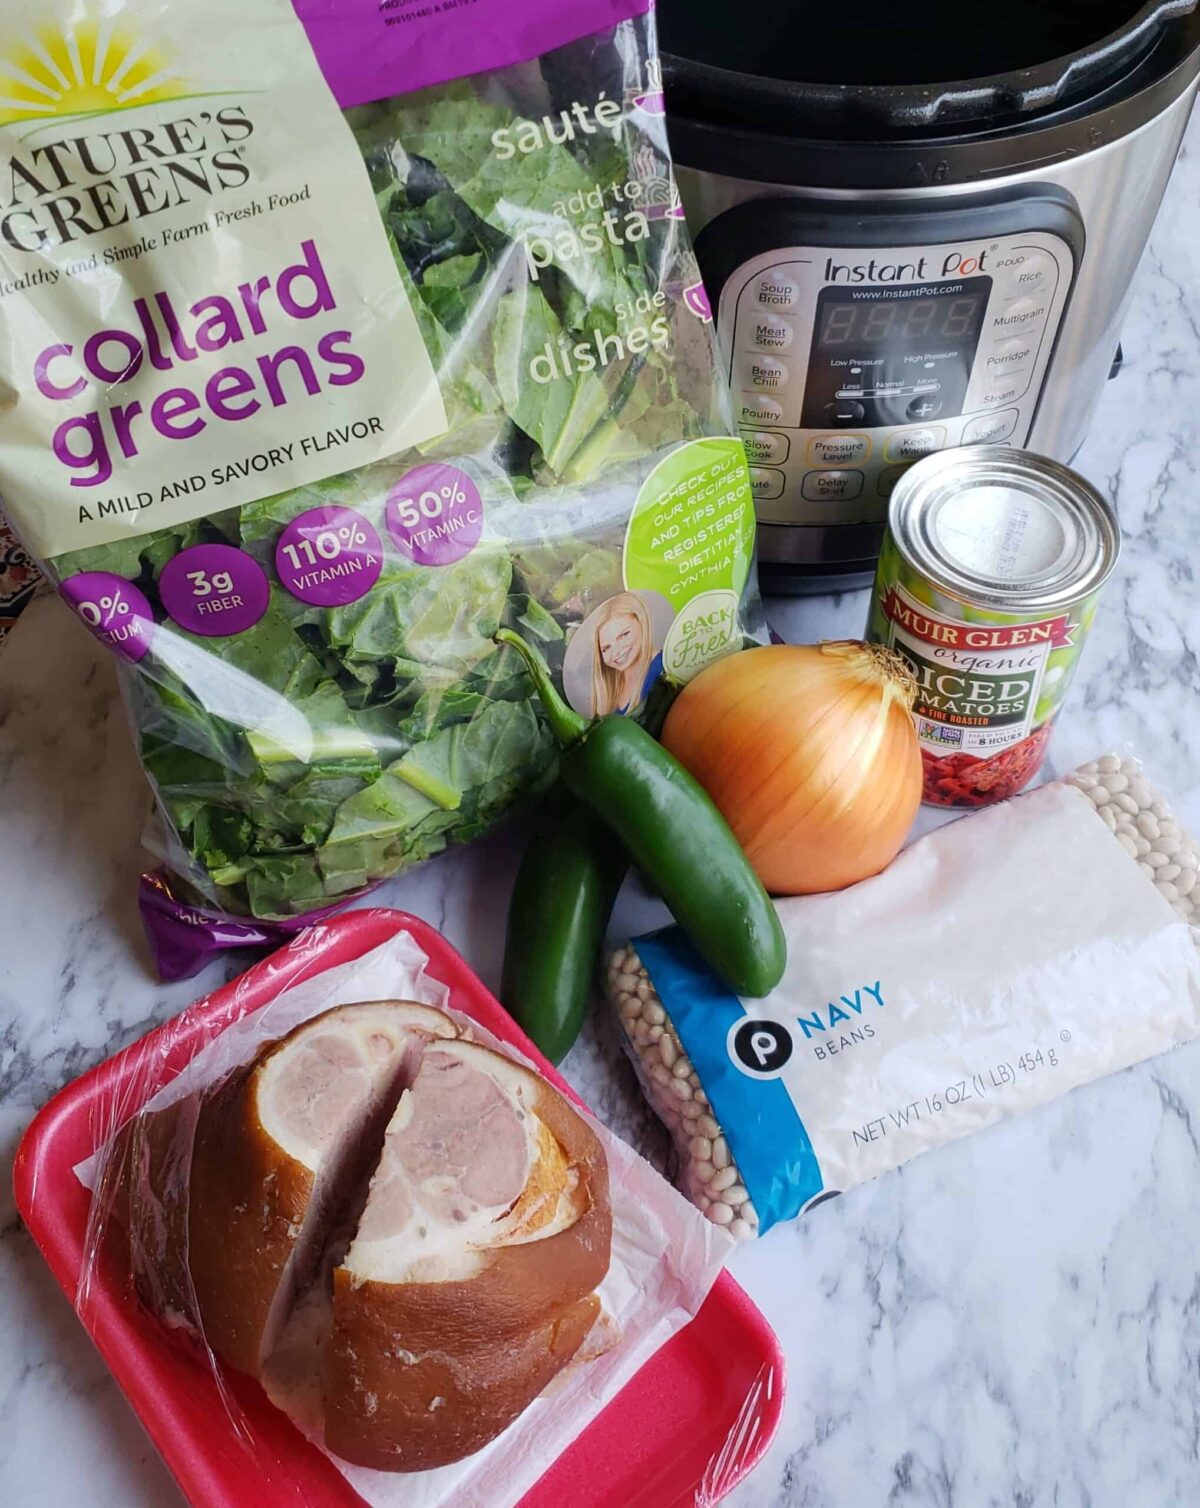 Ingredients for Instant Pot Collard Greens and Beans: Bag of collard greens, can of tomatoes, ham hock, jalapeno peppers, onion, dried Navy beans